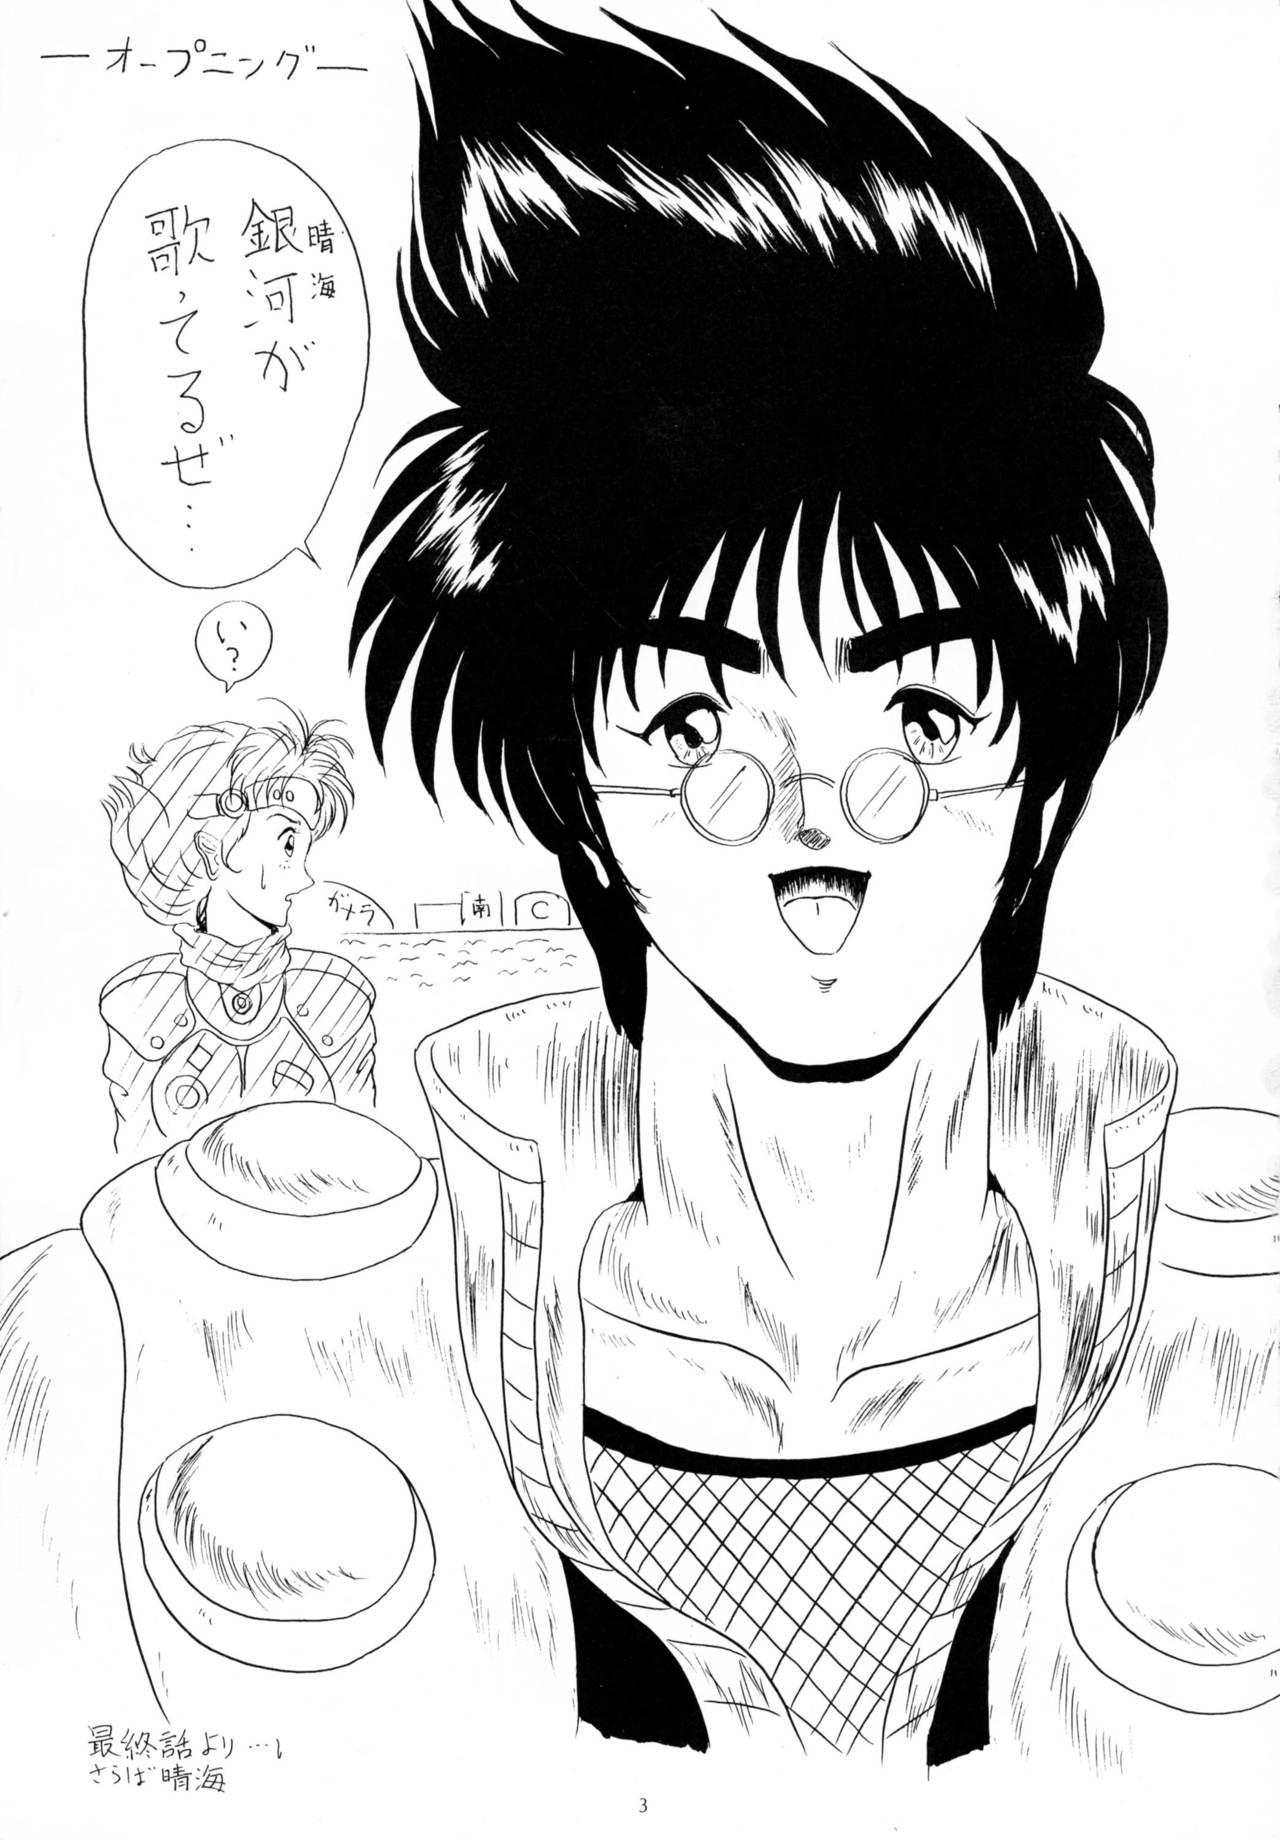 Daddy THE OMNIVOUS 09 - Neon genesis evangelion Sailor moon Magic knight rayearth Hard Cock - Page 3